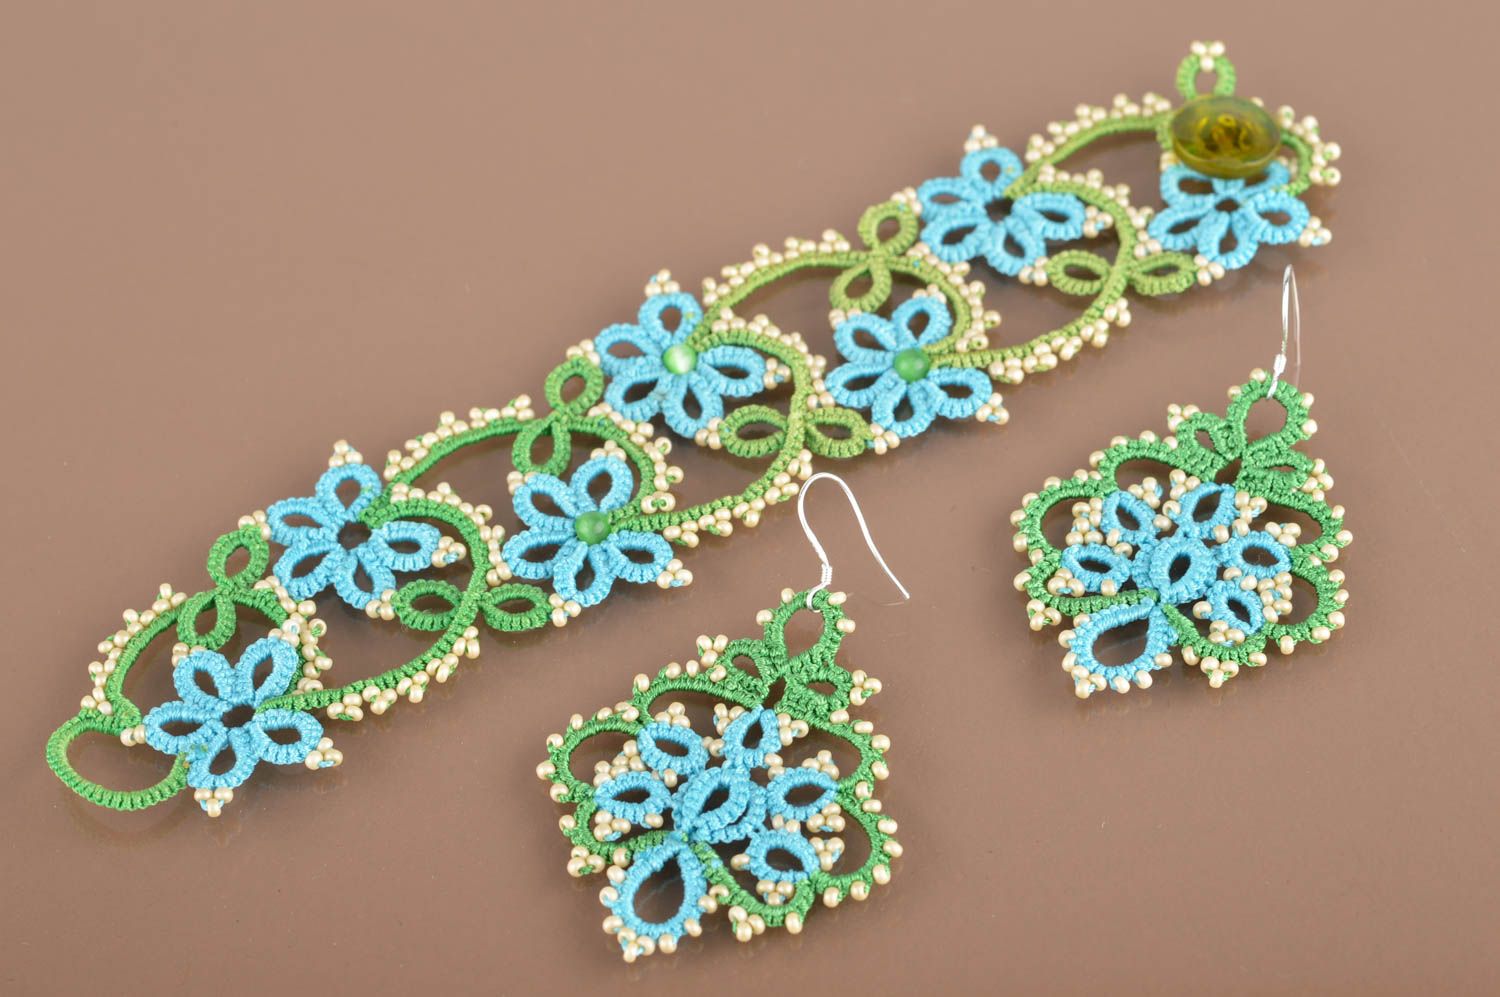 Handmade tatted jewelry set 2 items blue and green earrings and wrist bracelet photo 2